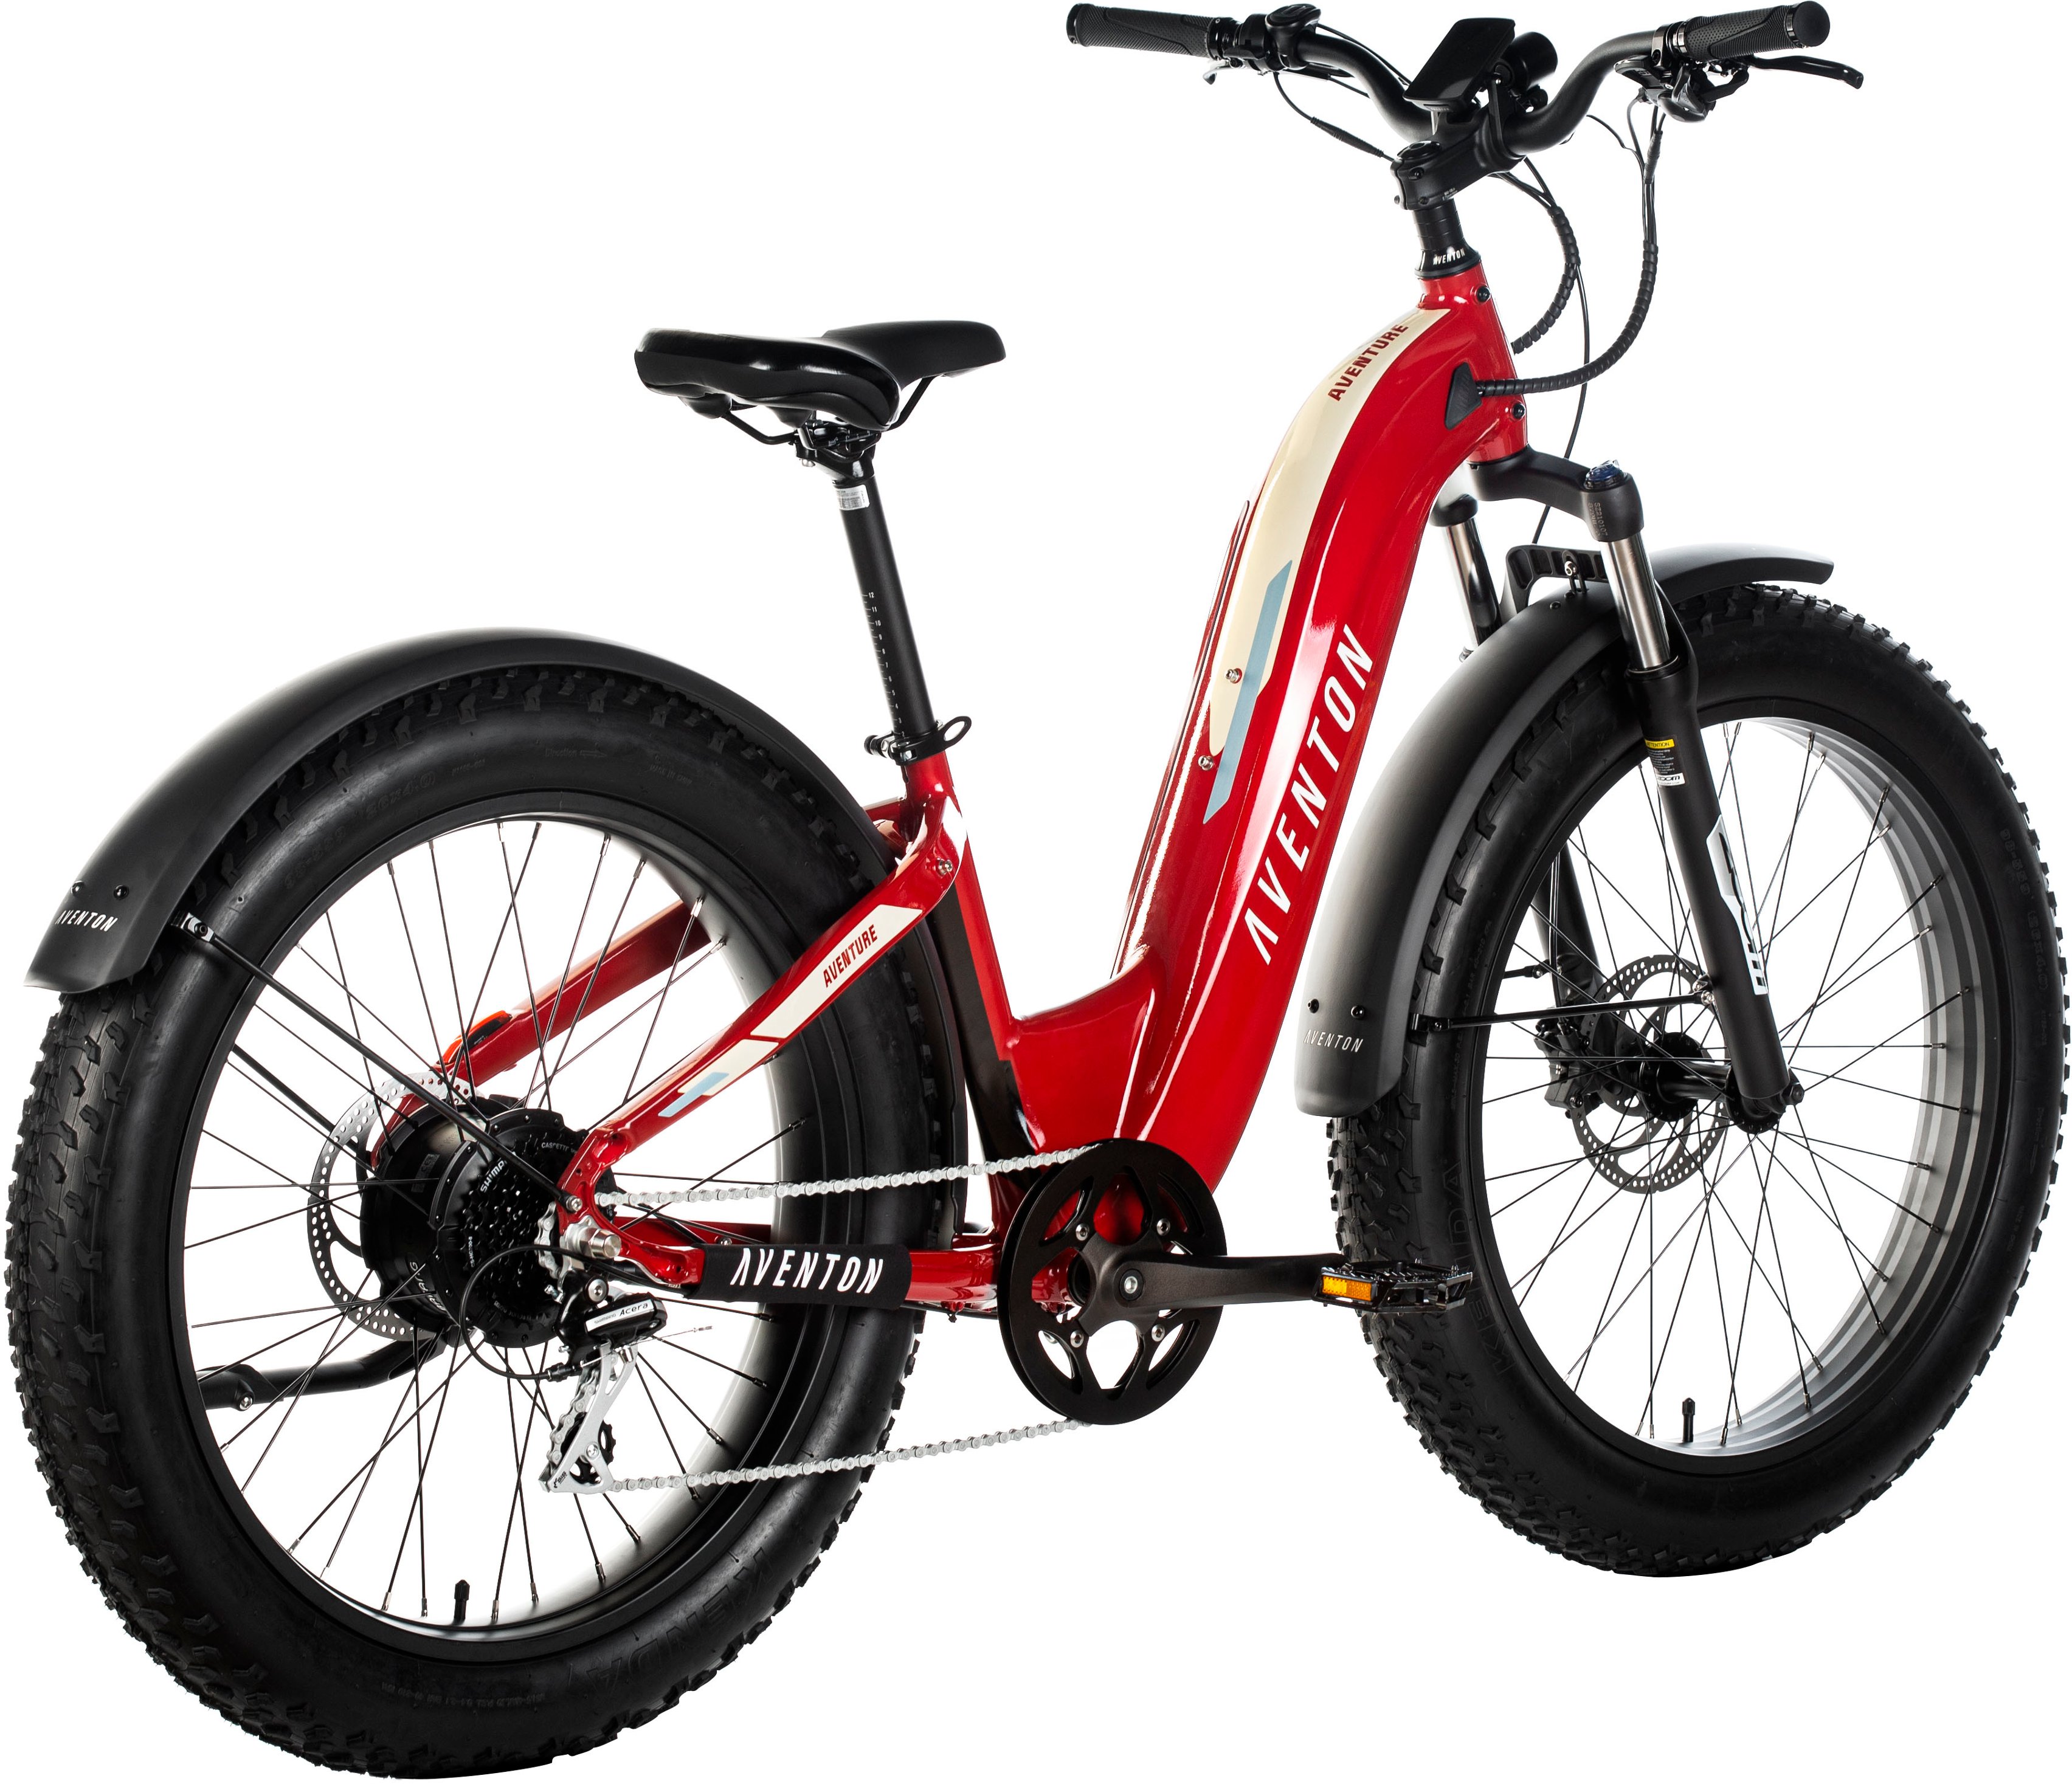 Heybike Launches eBikes in Select Best Buy Stores and bestbuy.com